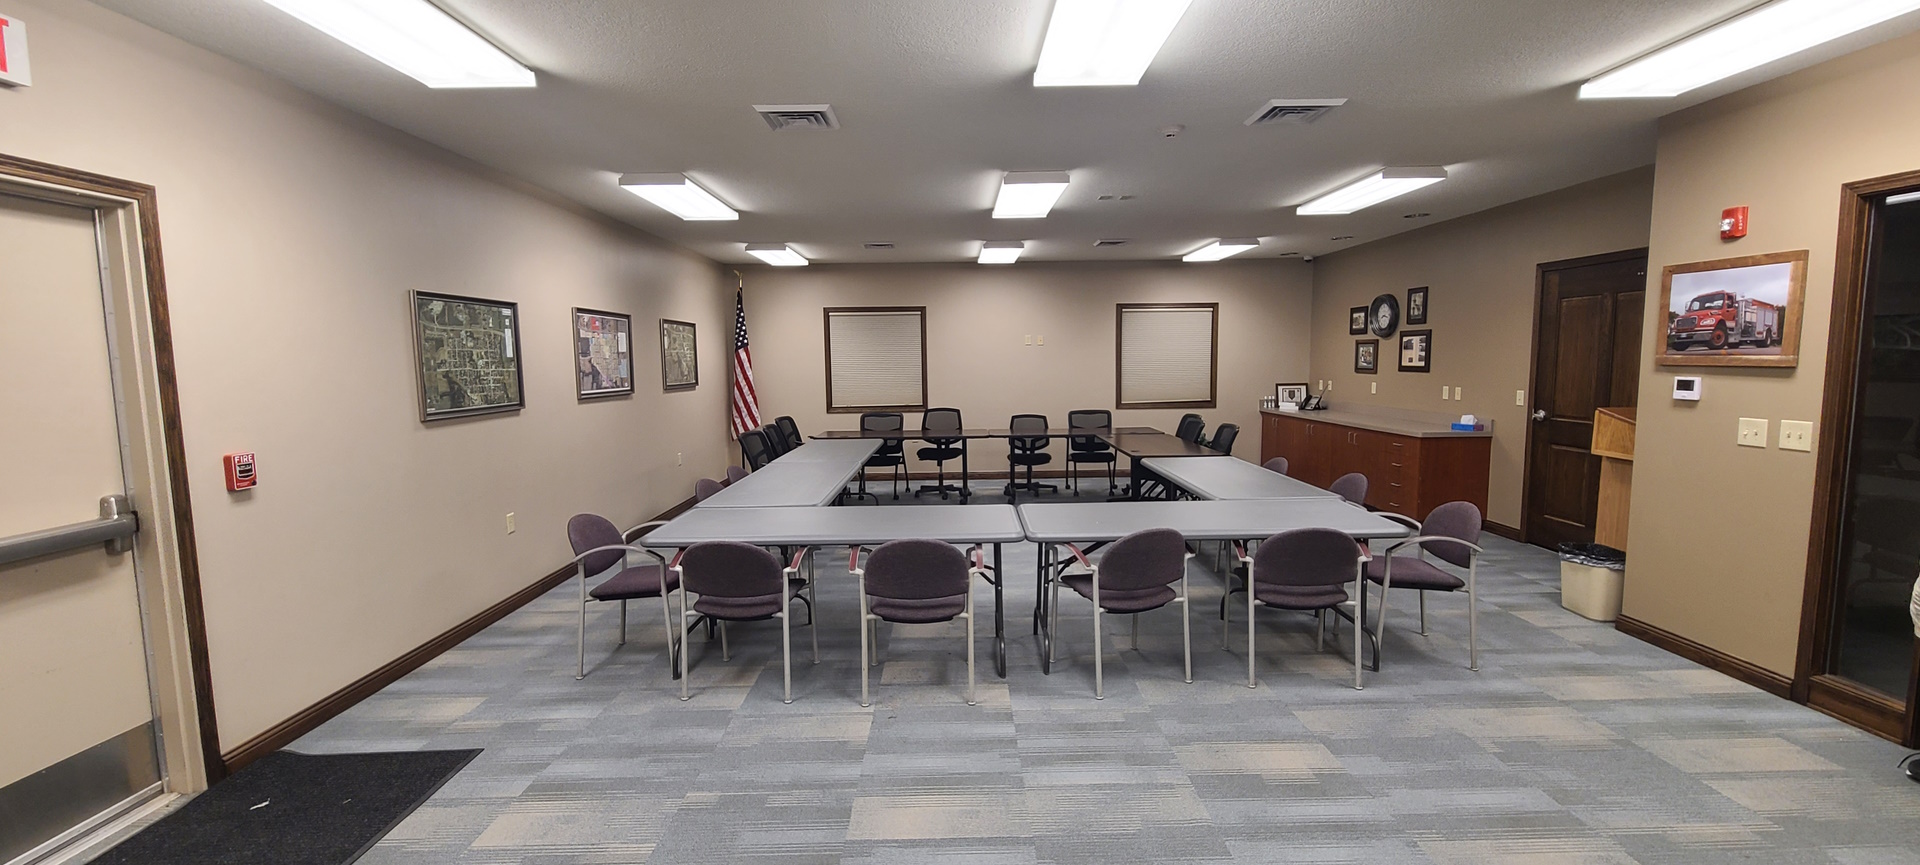 city-hall-conference-room-1